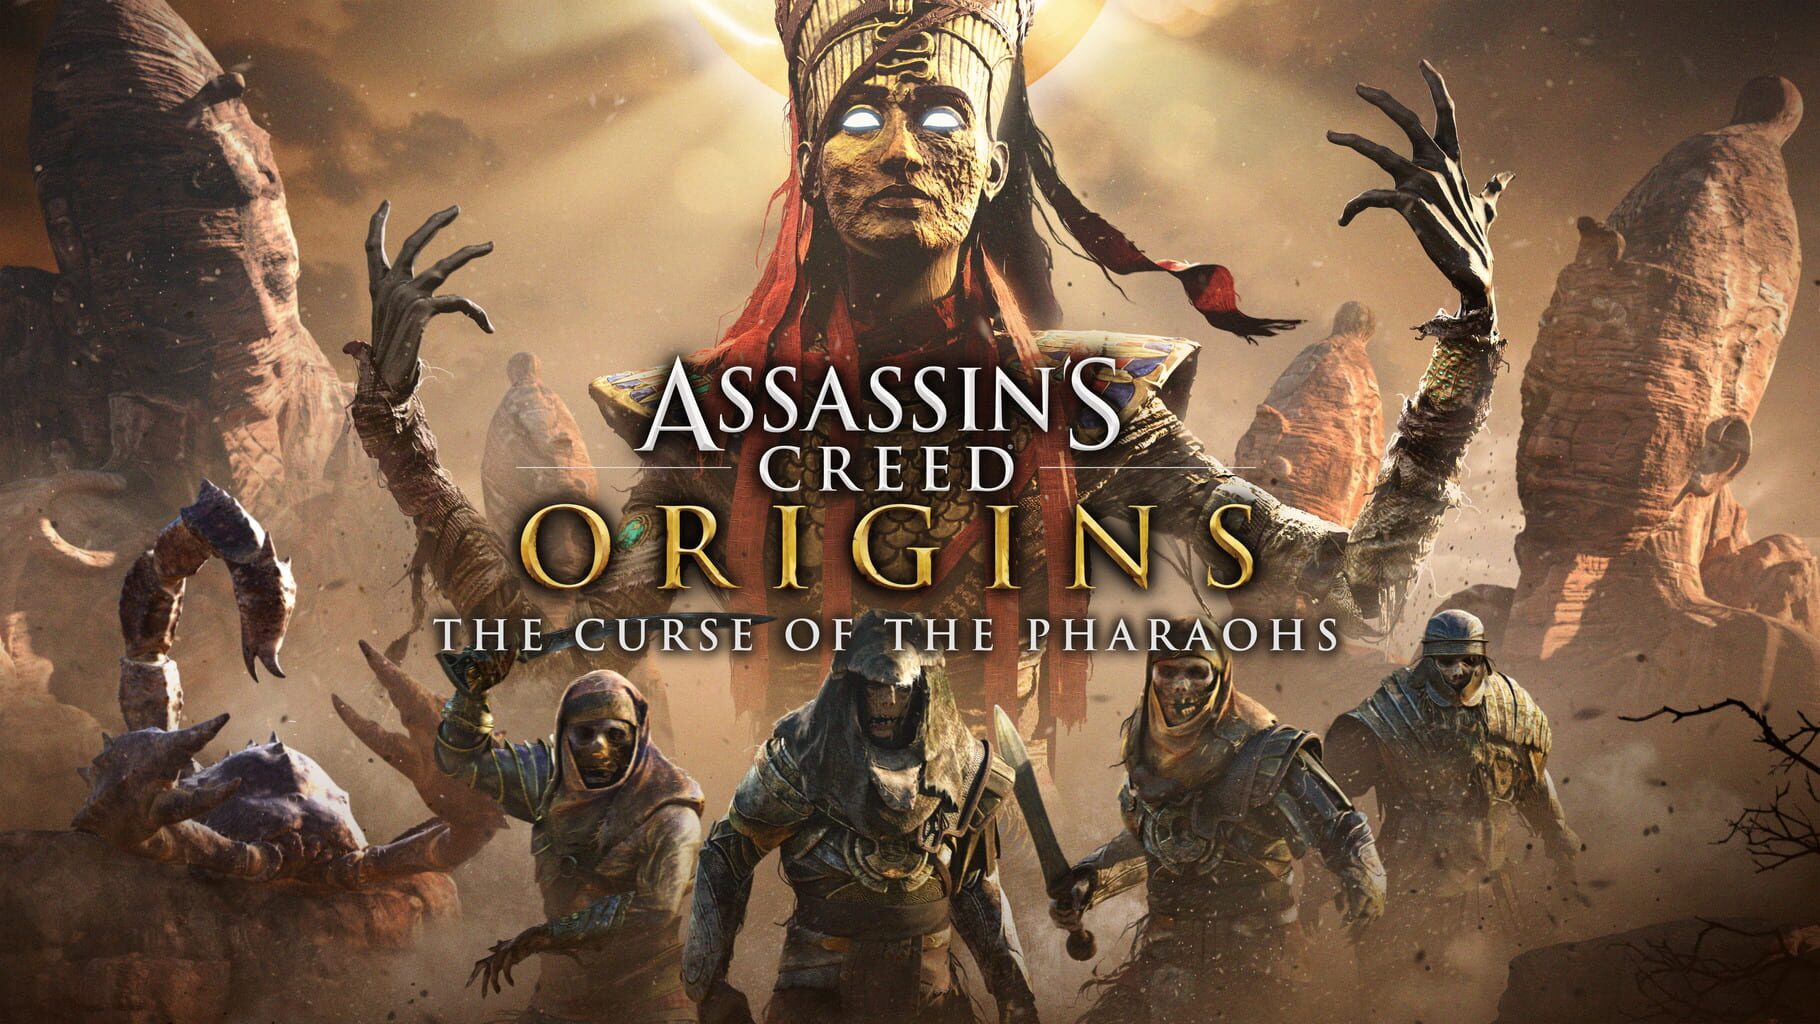 Artwork for Assassin's Creed Origins: The Curse of the Pharaohs